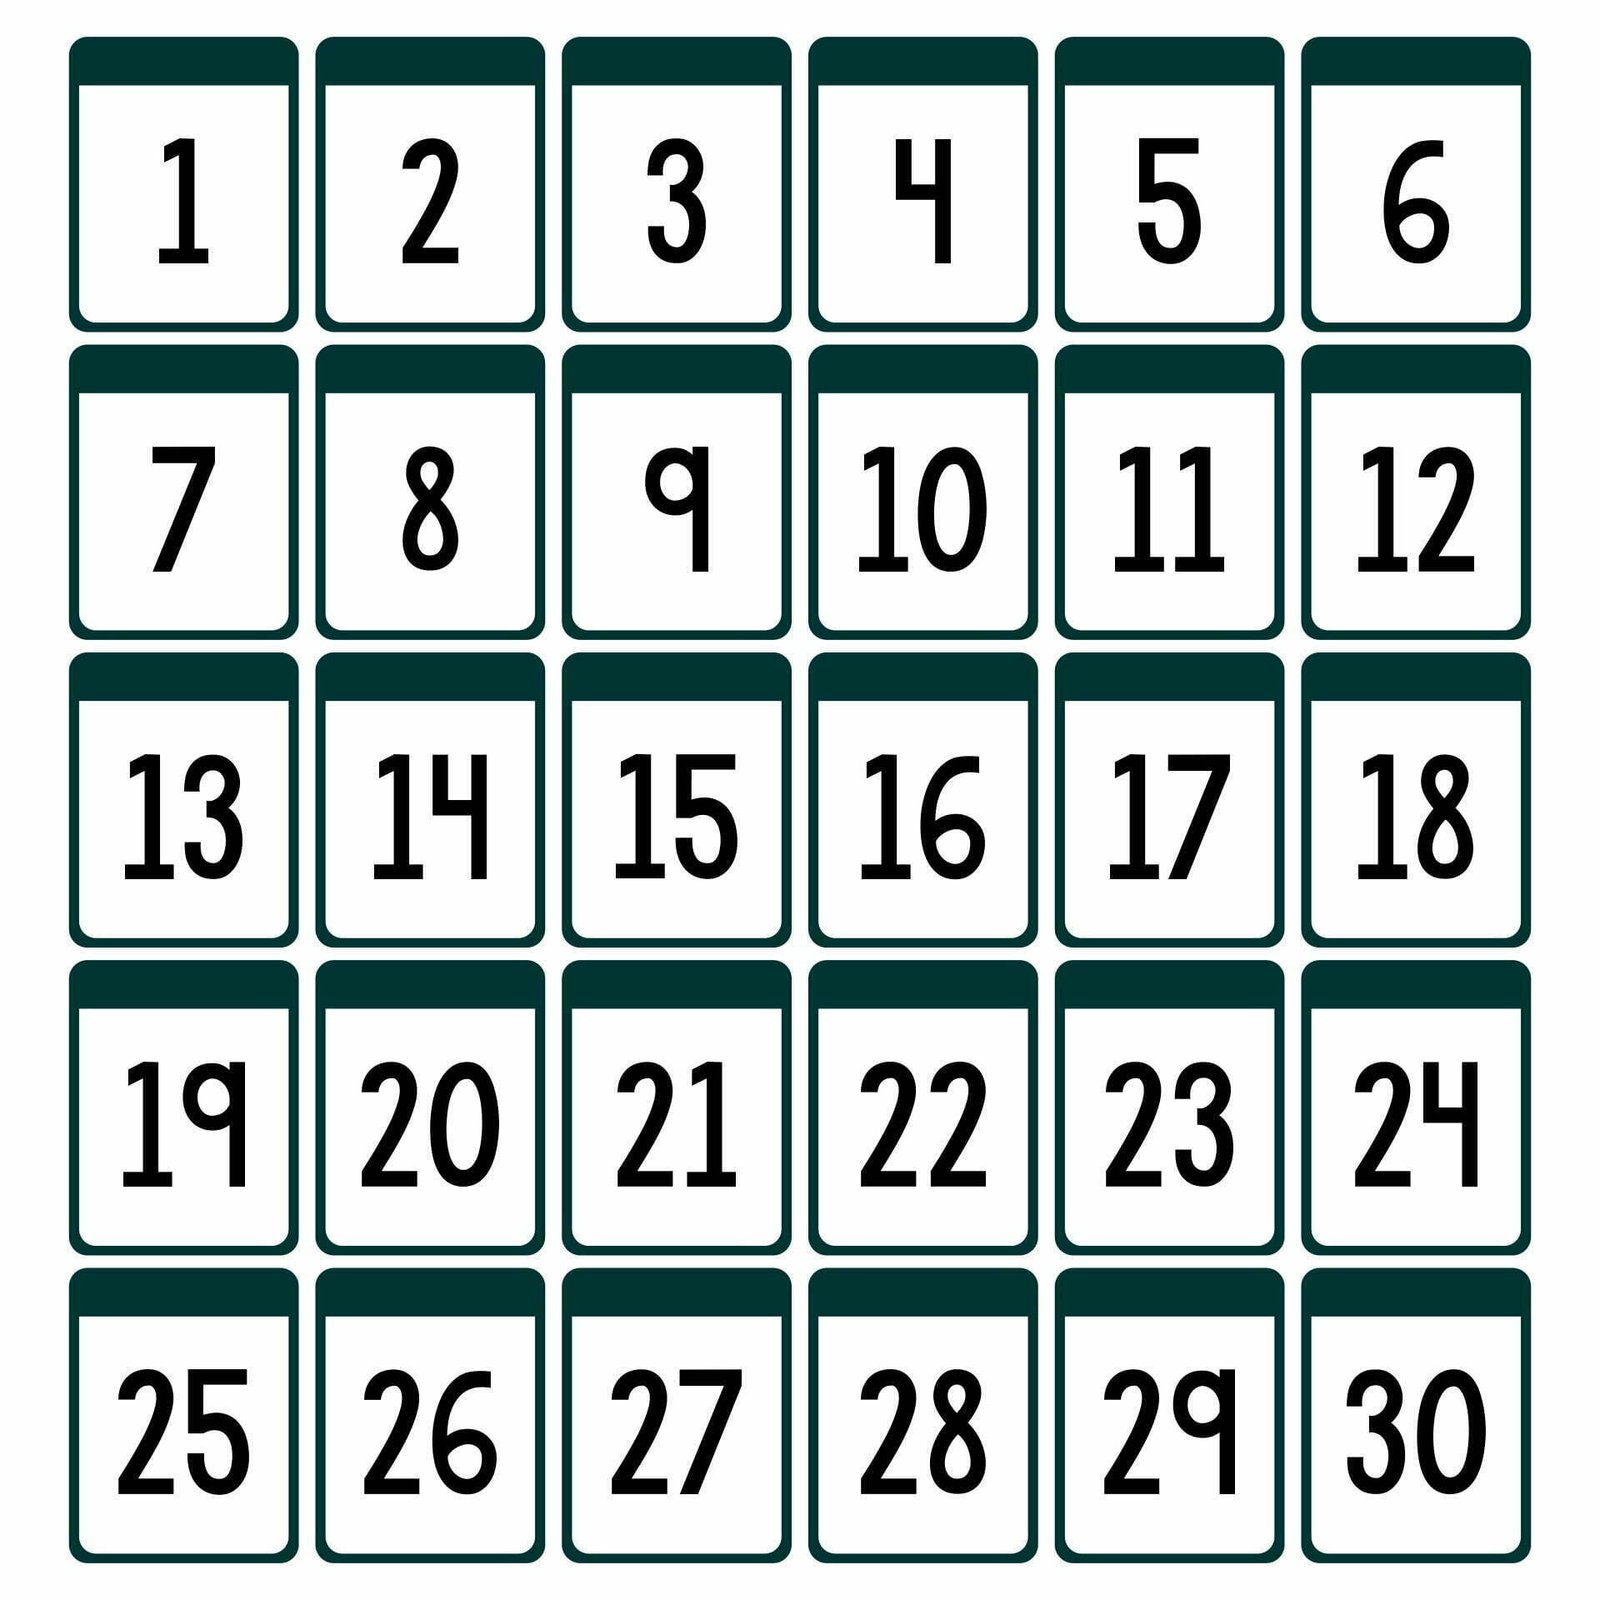 9 Best Images of Printable Numbers From 1 30 - Printable ...